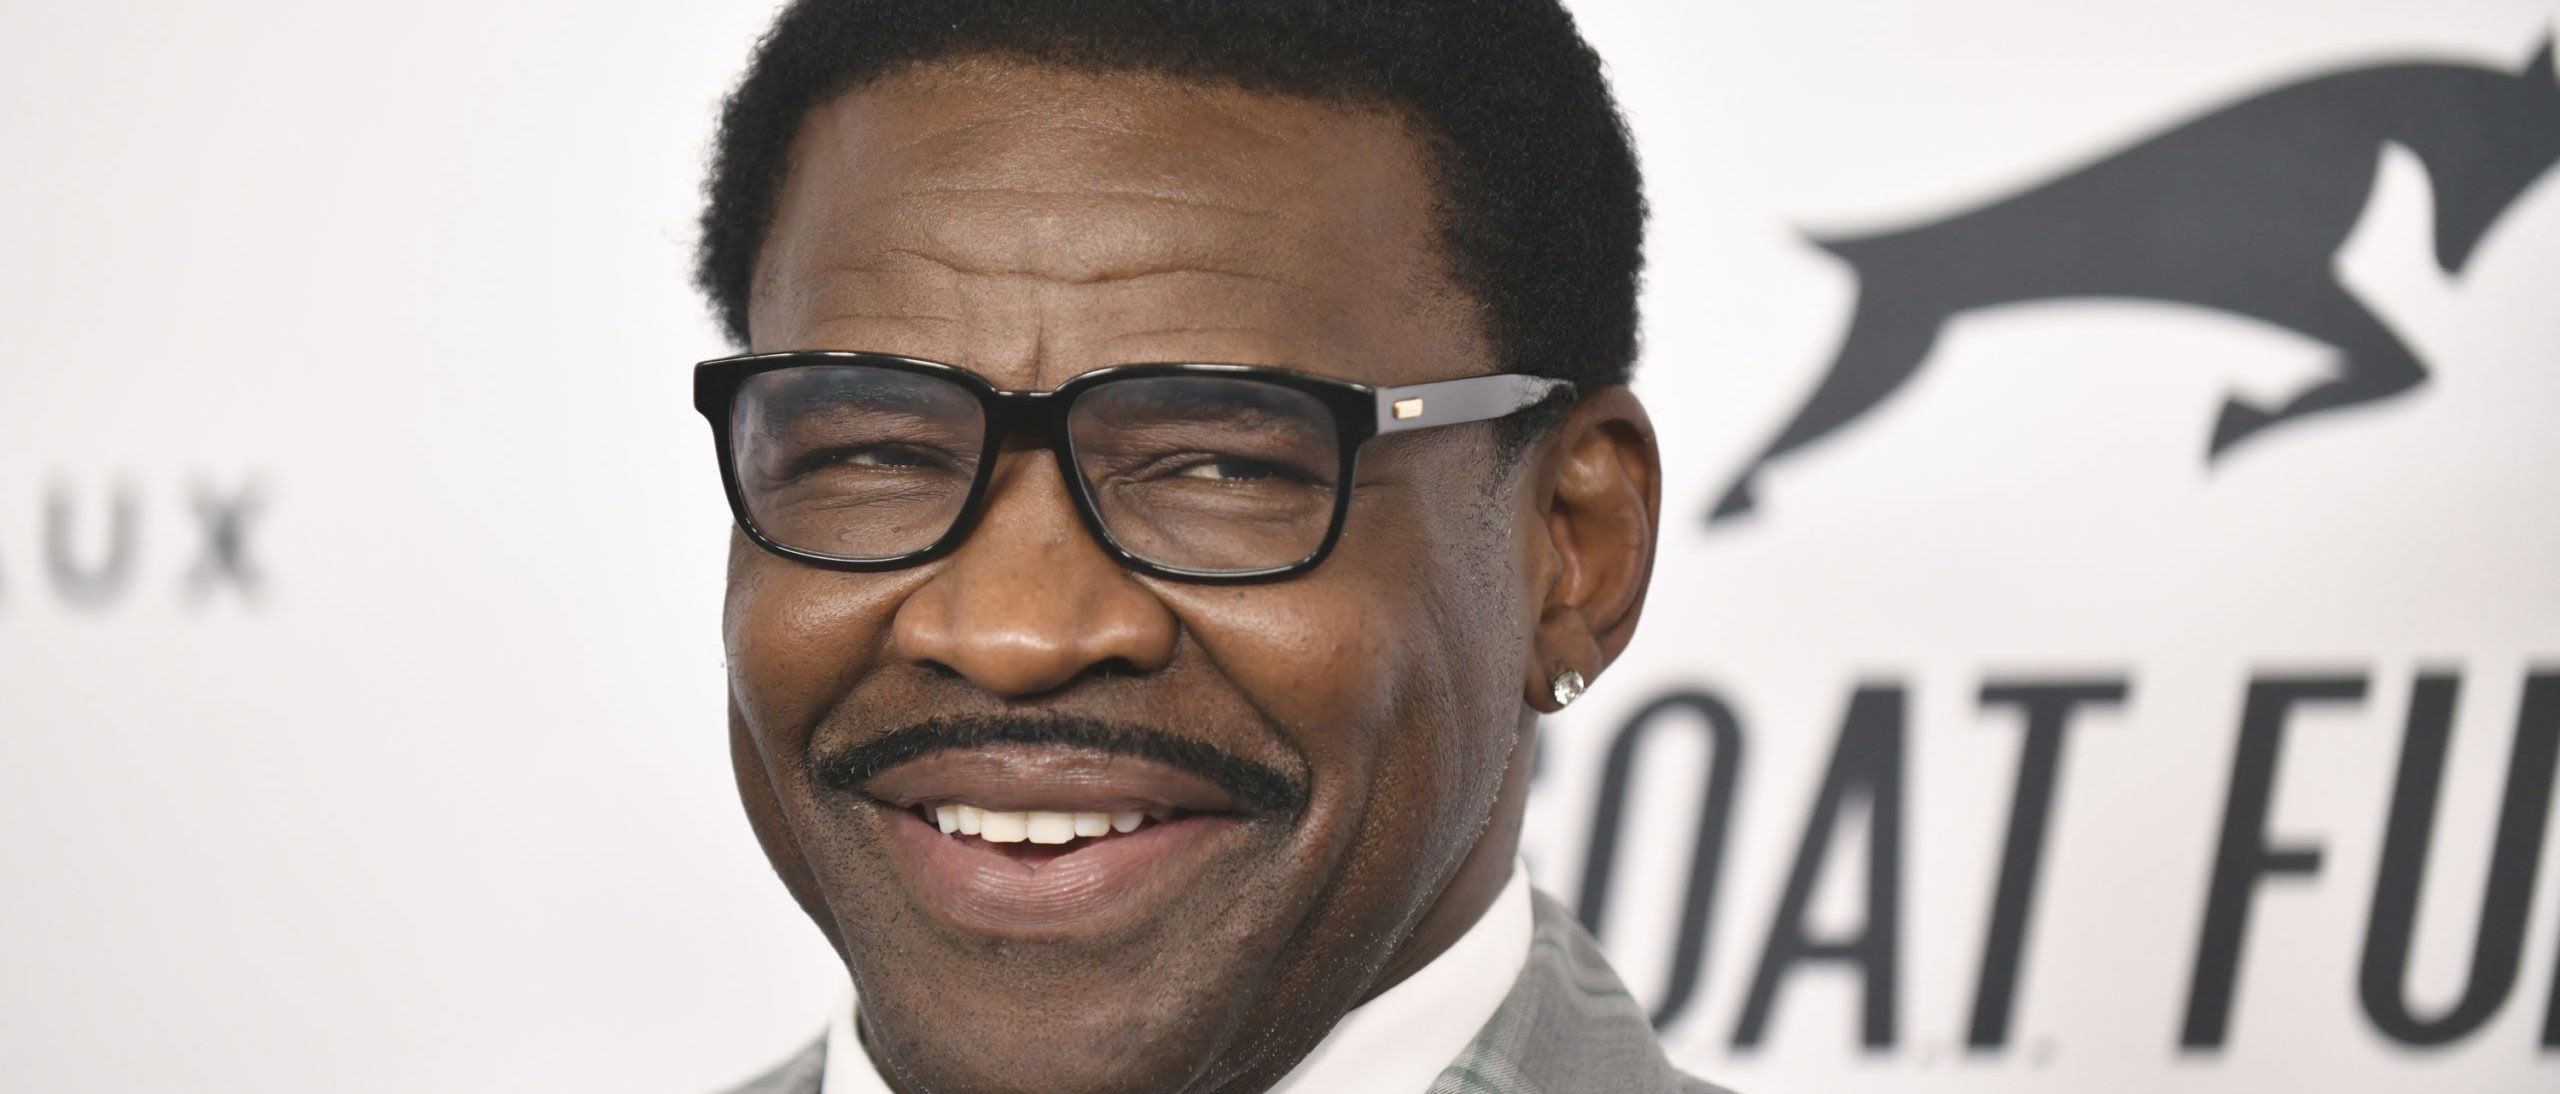 Michael Irvin Hits Accuser And Marriott With $100 Million Lawsuit, Claims Allegations Against Him Are False